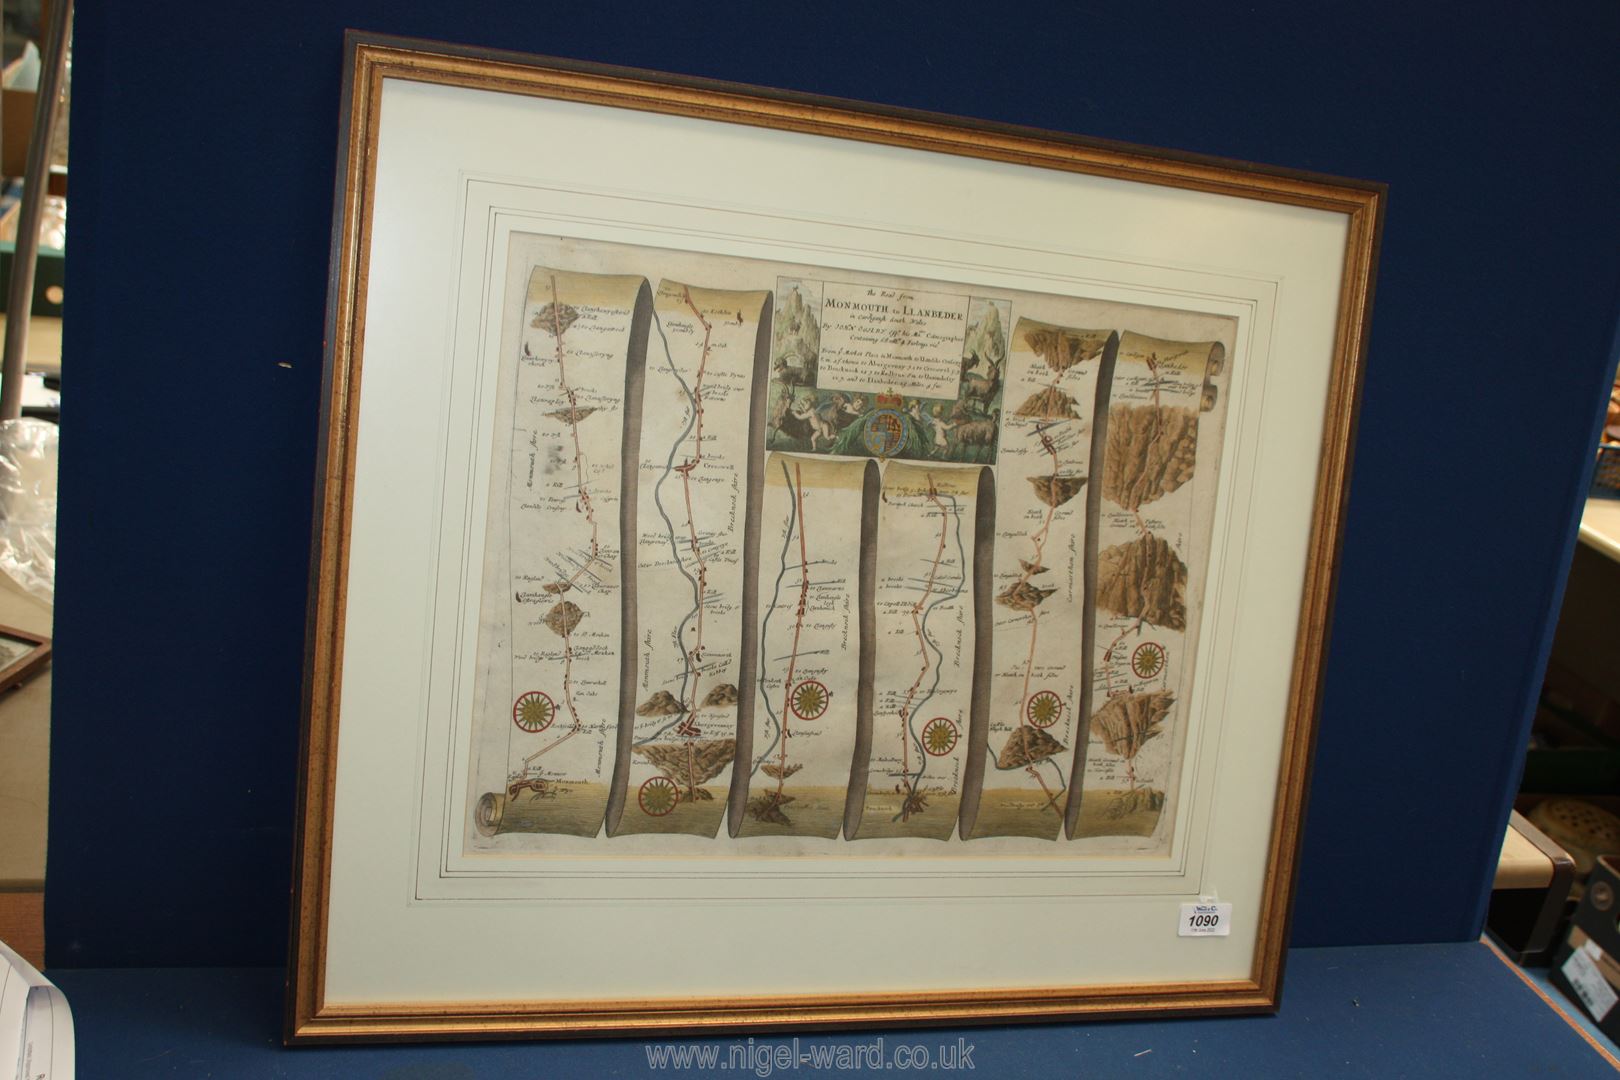 A framed map by John Ogilby of 'The Road from Monmouth to Llanbeder',